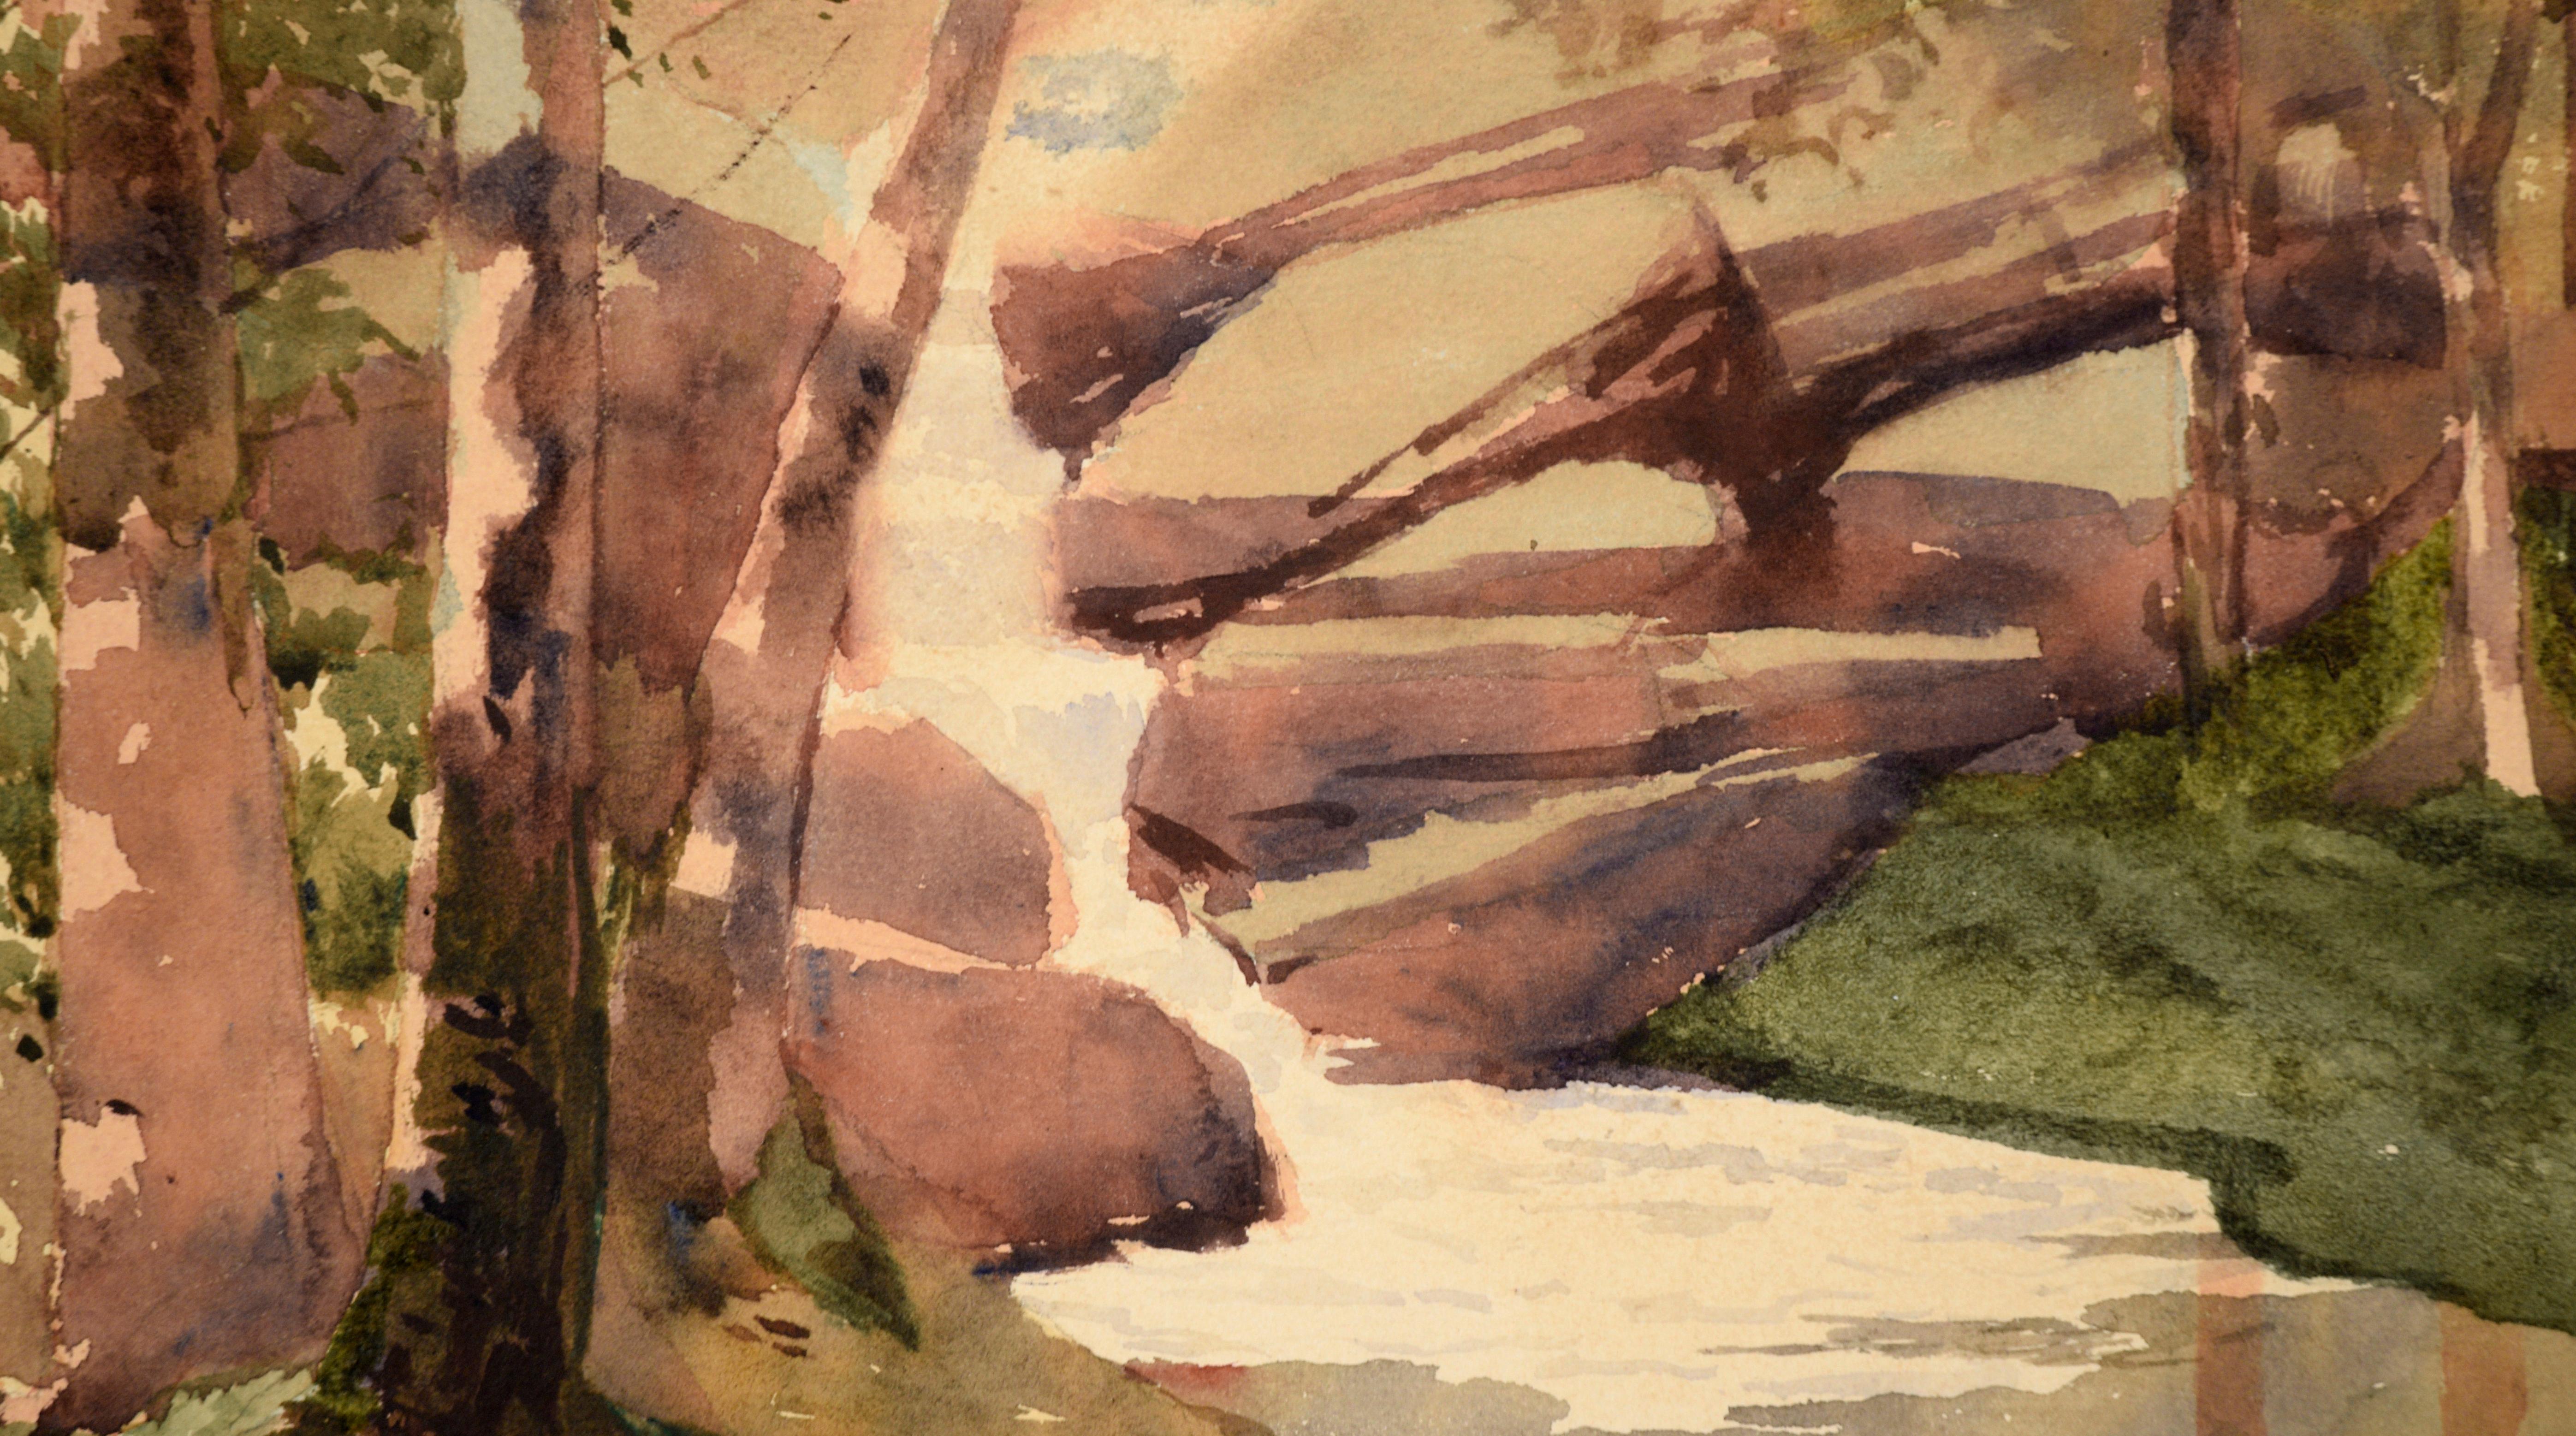 Cascading Stream in the Woods - Watercolor Landscape on Paper - American Impressionist Art by Helen R. Barham